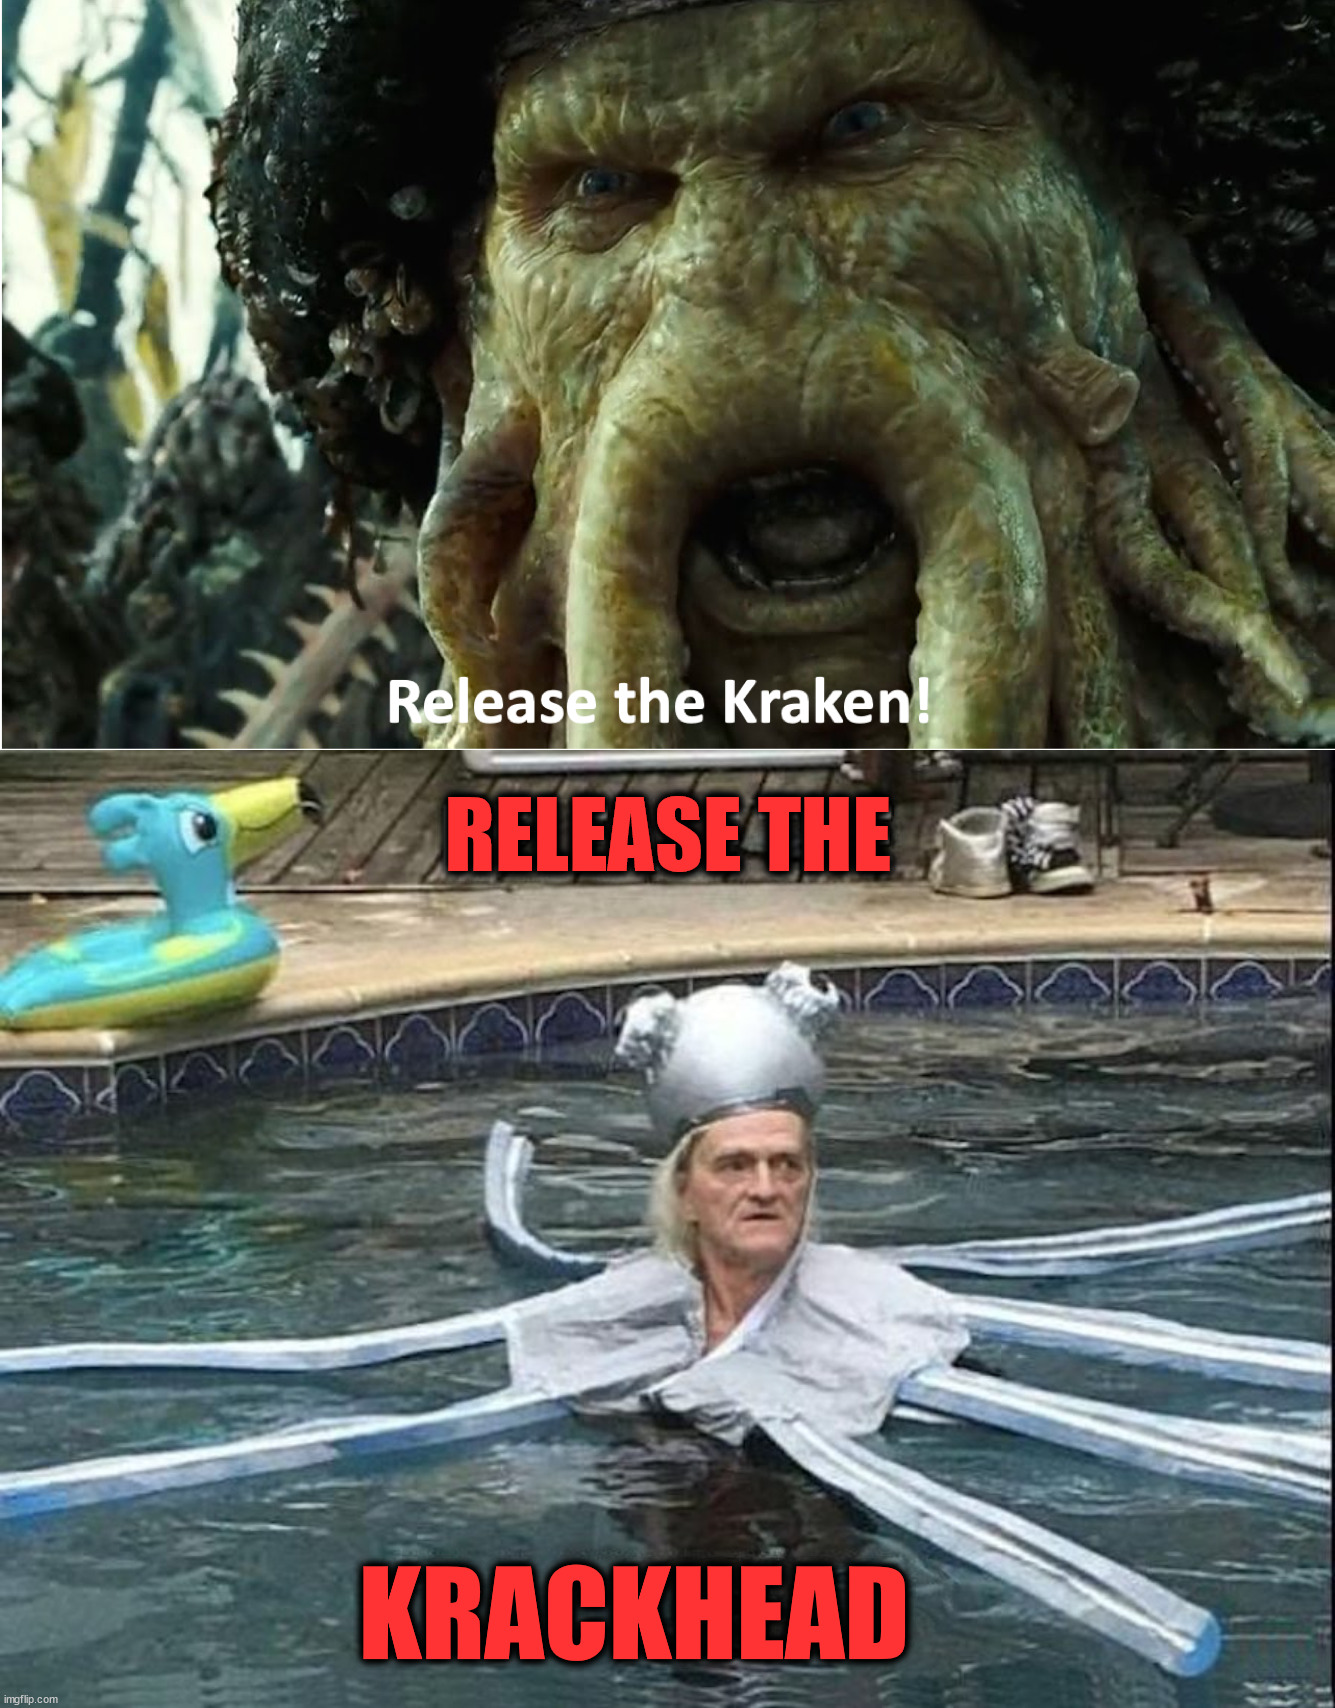 Not what I meant, but acceptable. | RELEASE THE; KRACKHEAD | image tagged in release the kraken,crackhead | made w/ Imgflip meme maker